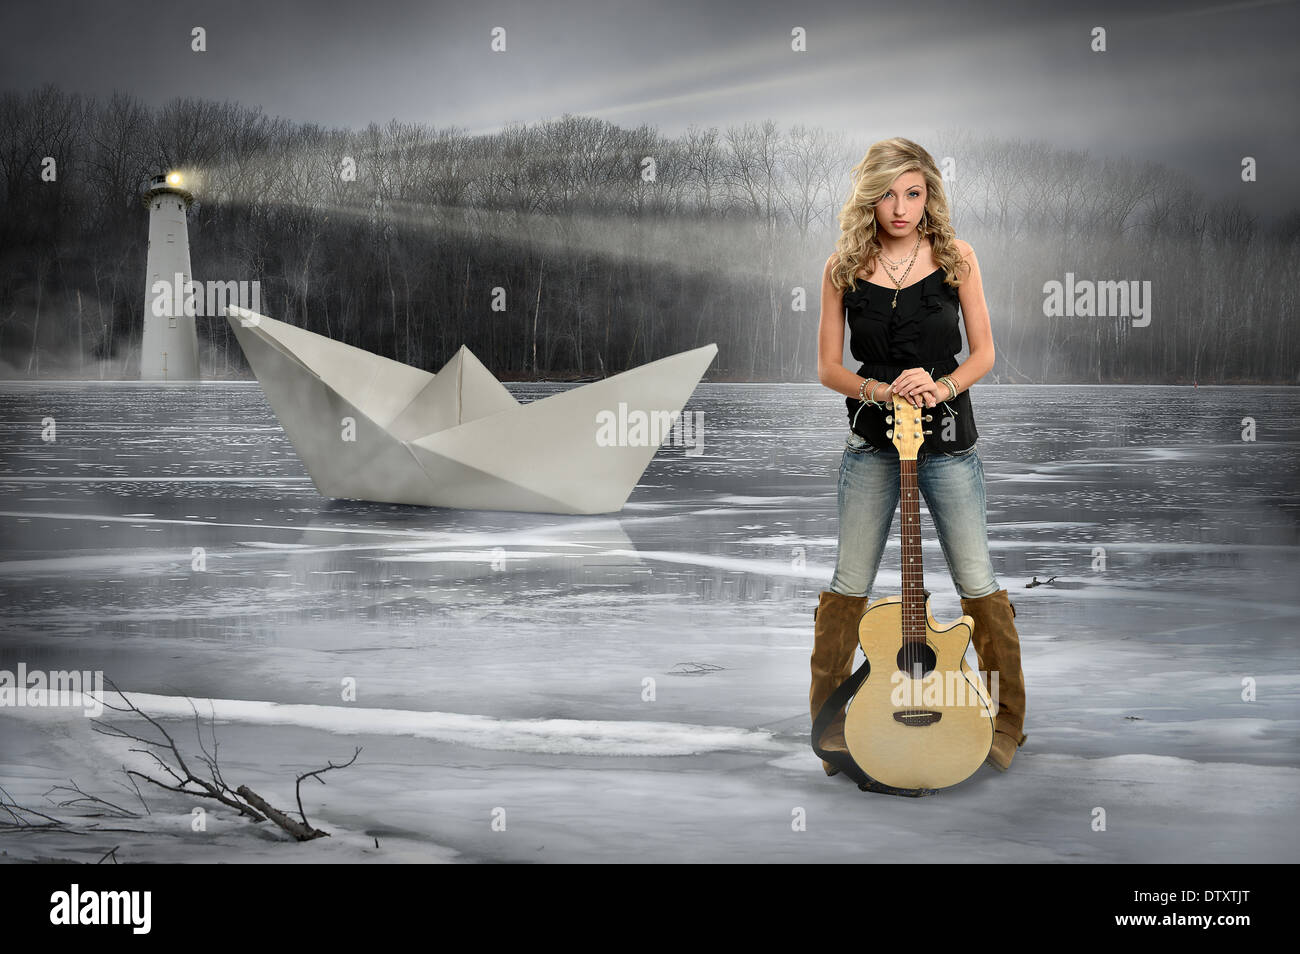 Young teen girl holding guitar standing on frozen lake Stock Photo